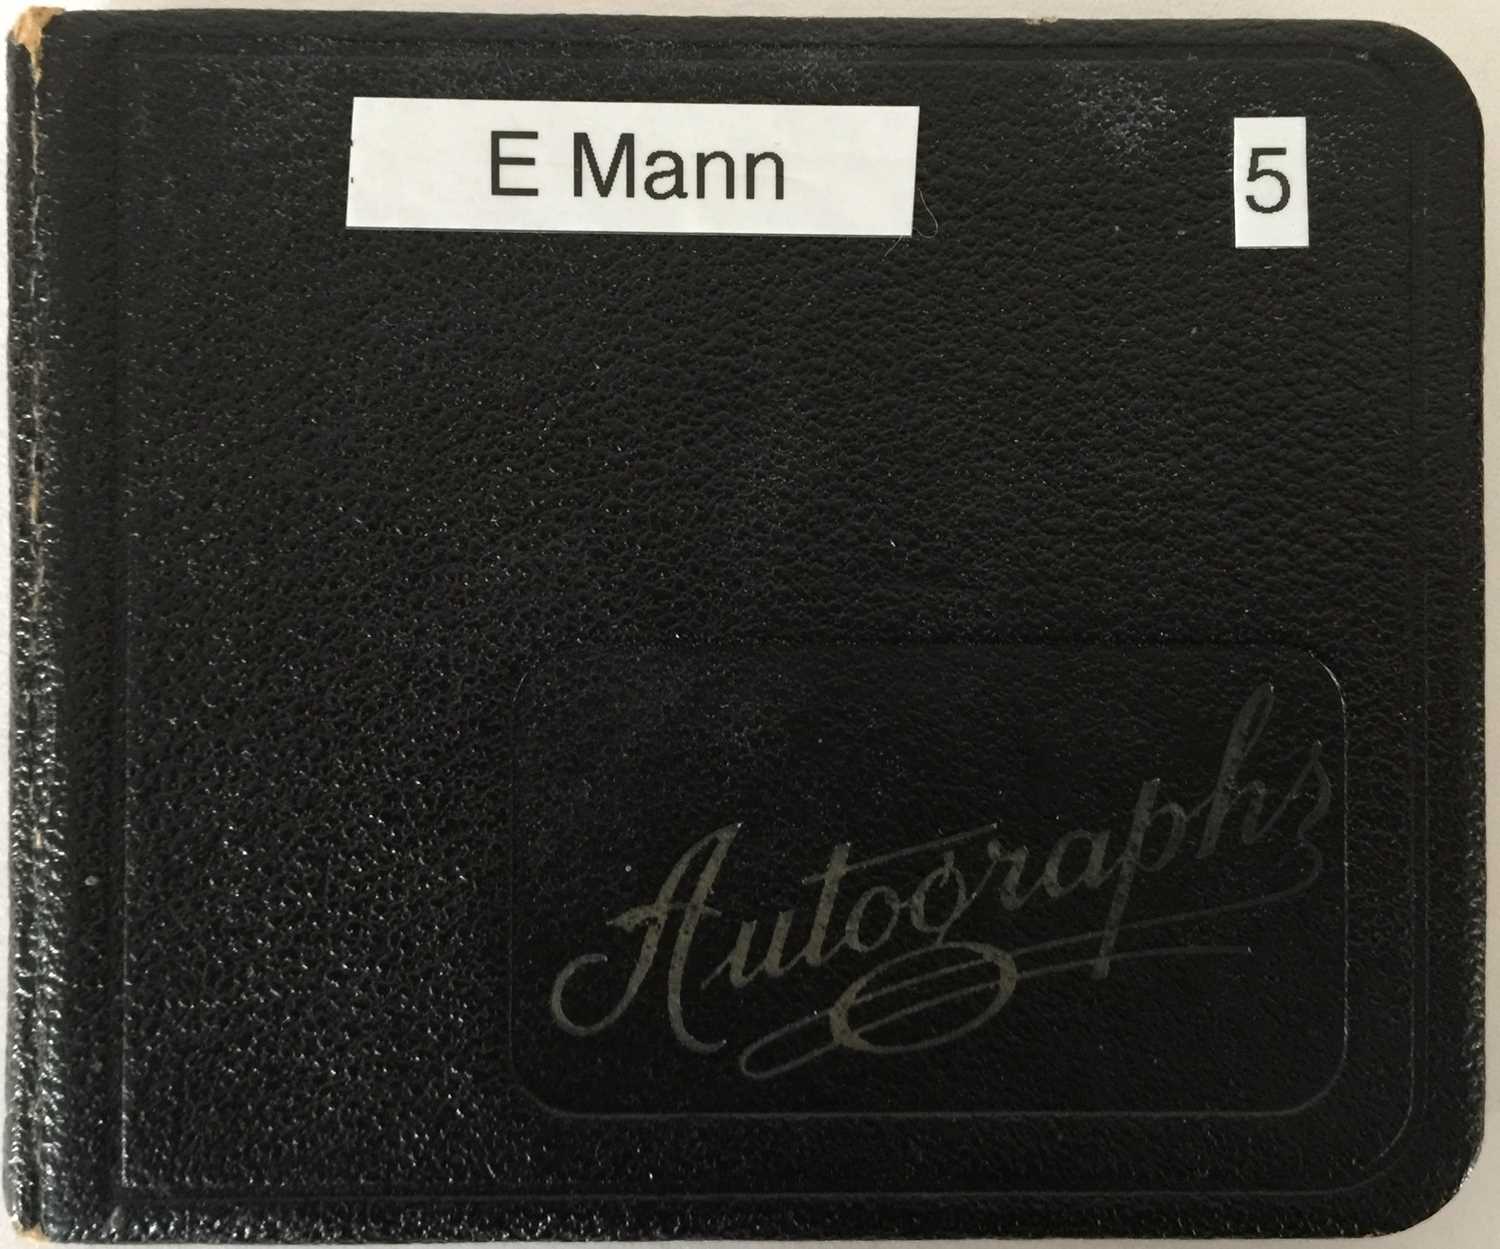 Lot 79 - AUTOGRAPH BOOK WITH STARS OF STAGE AND SCREEN - ERROL FLYNN / LONNIE DONEGAN AND MORE.